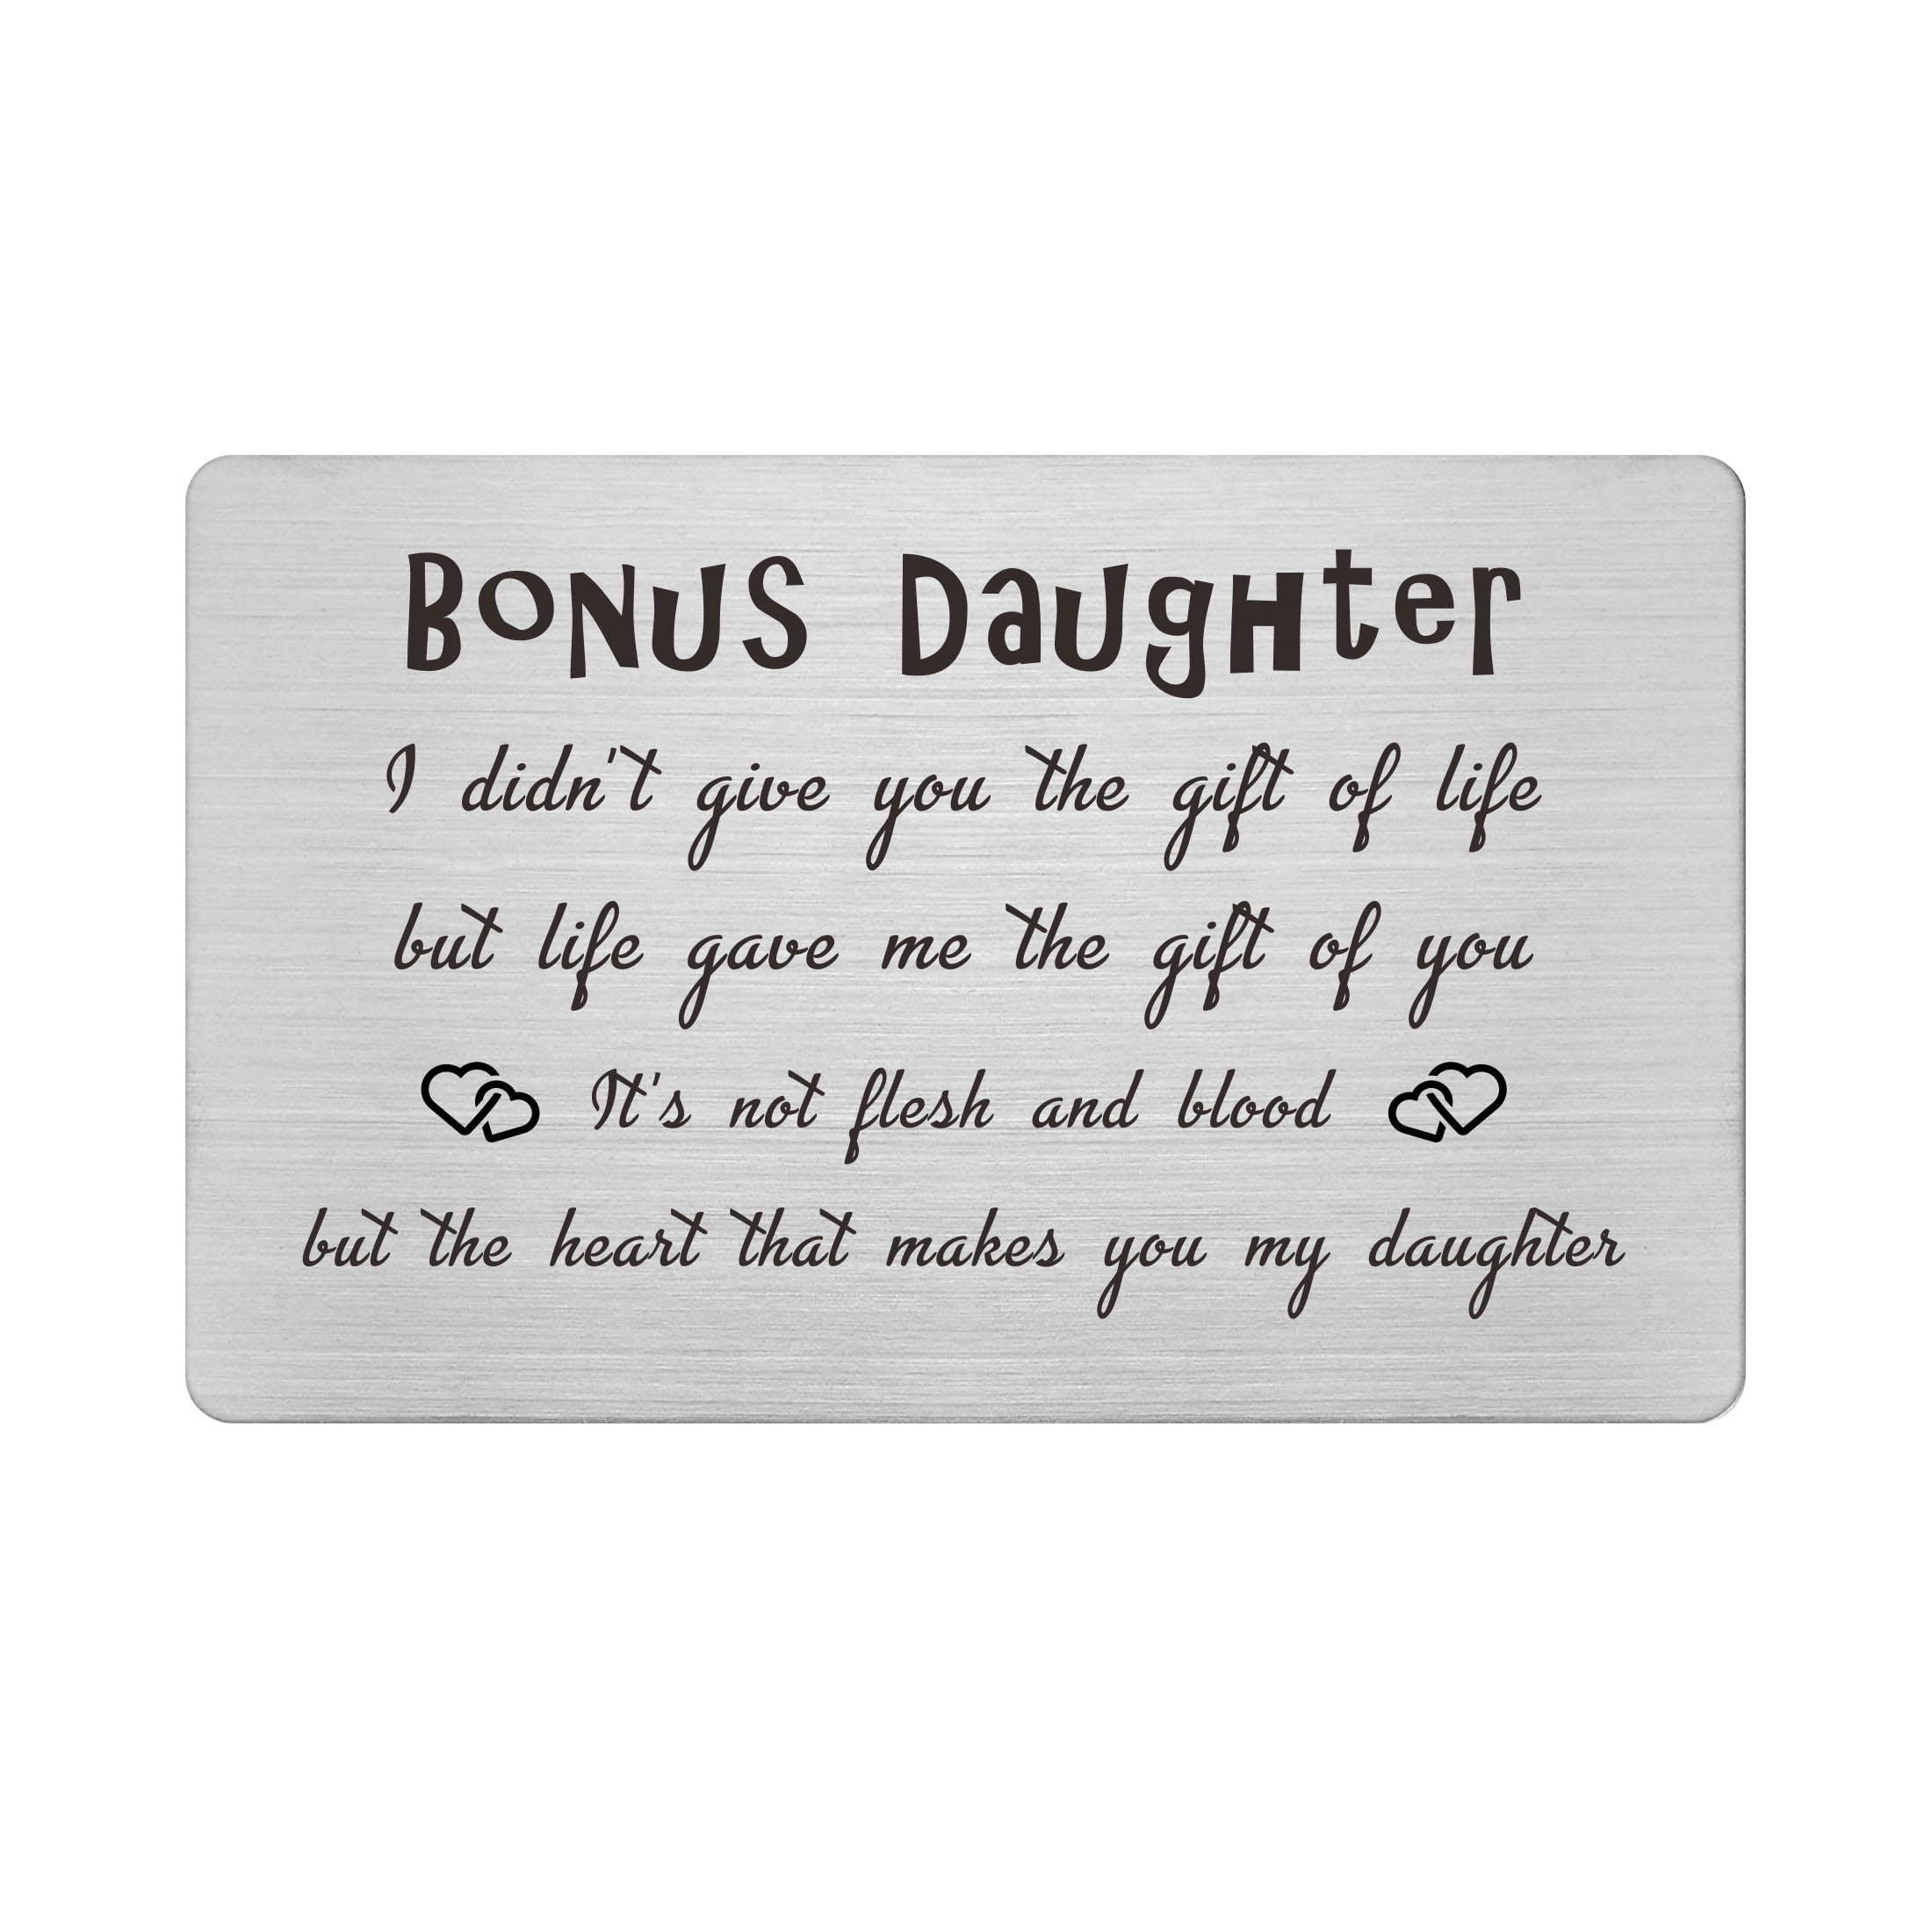 Step Daughter Gift from Stepmom Stepdad， To My Bonus Daughter Love Kno -  Sayings into Things